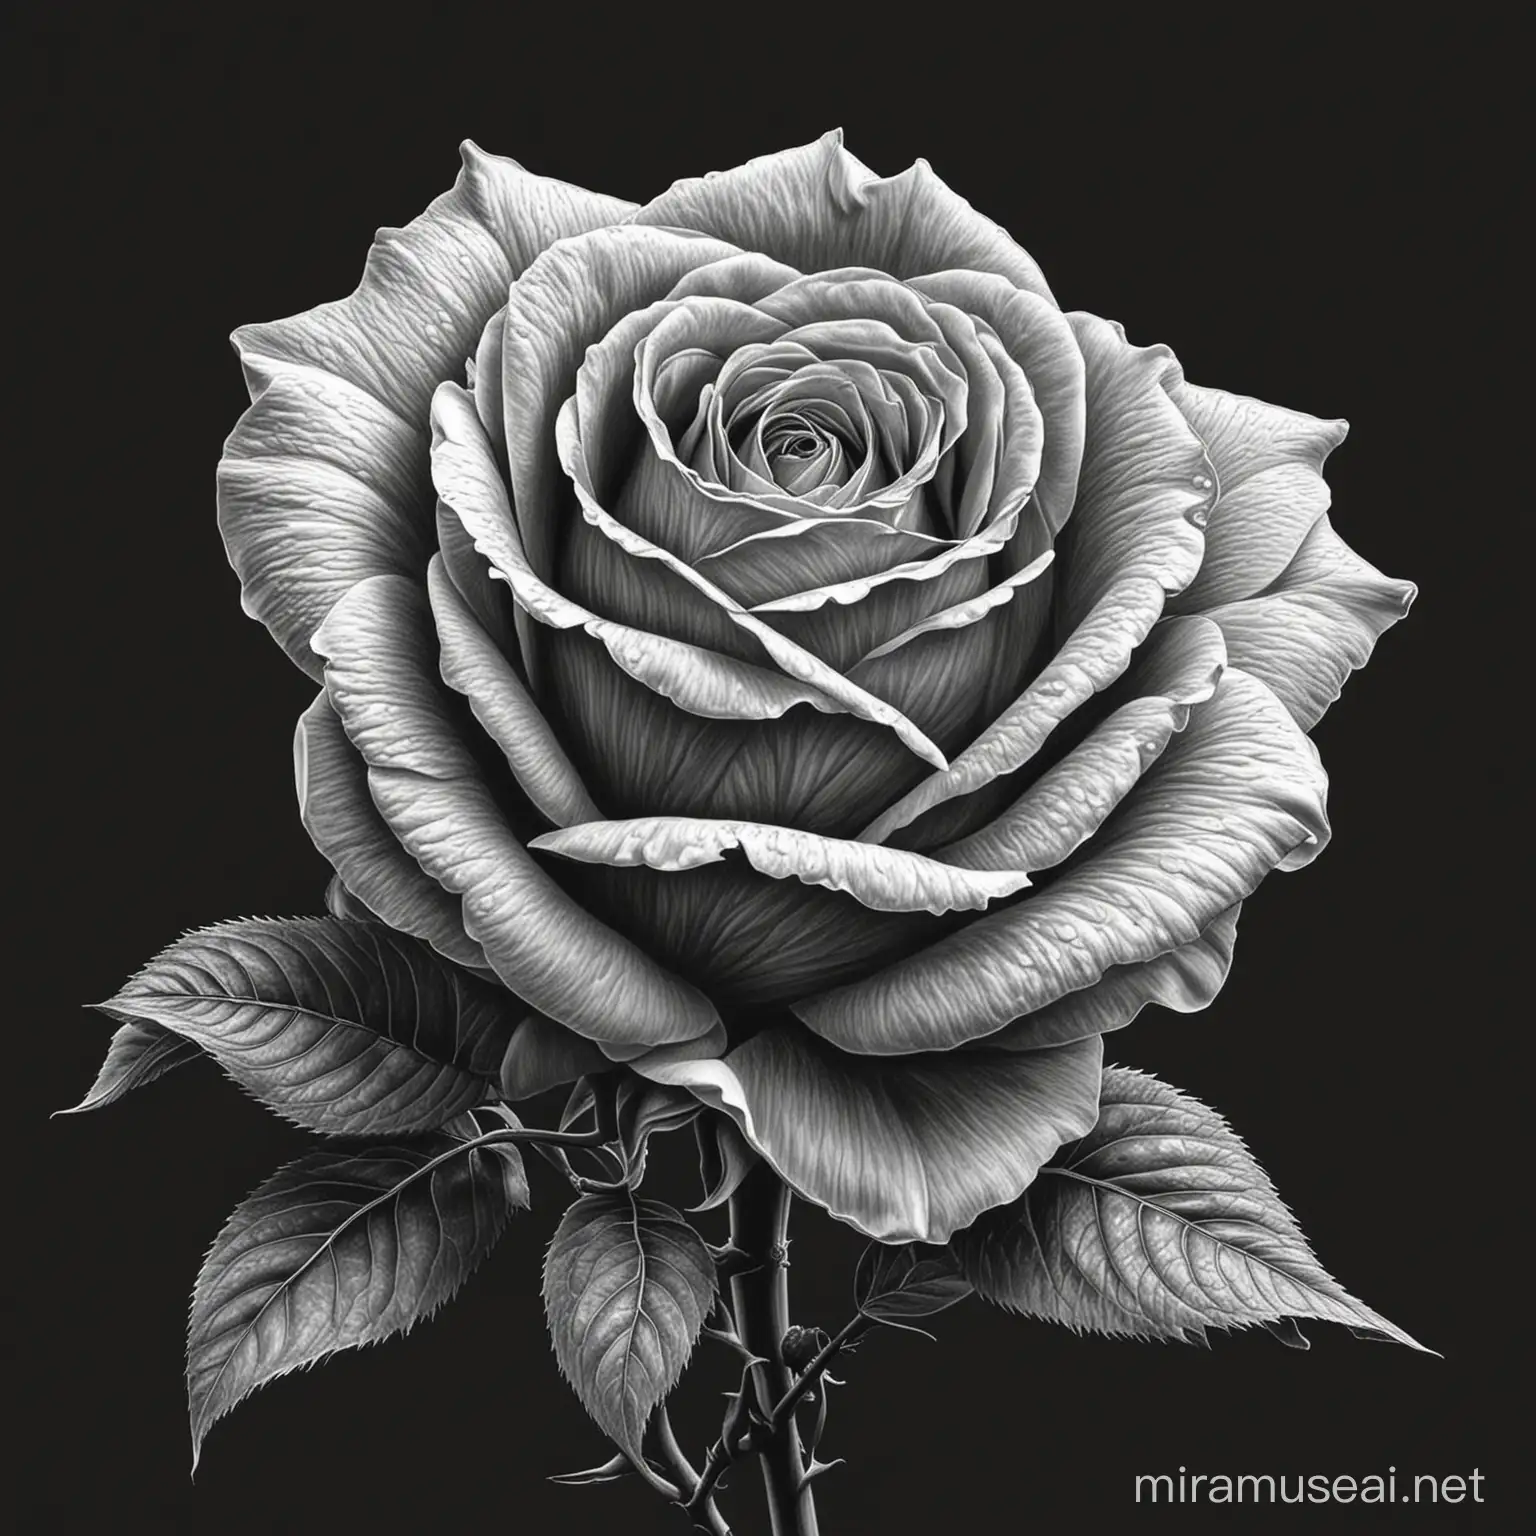  rose white lined with black backgroud
vector, zoomed a litle bit
